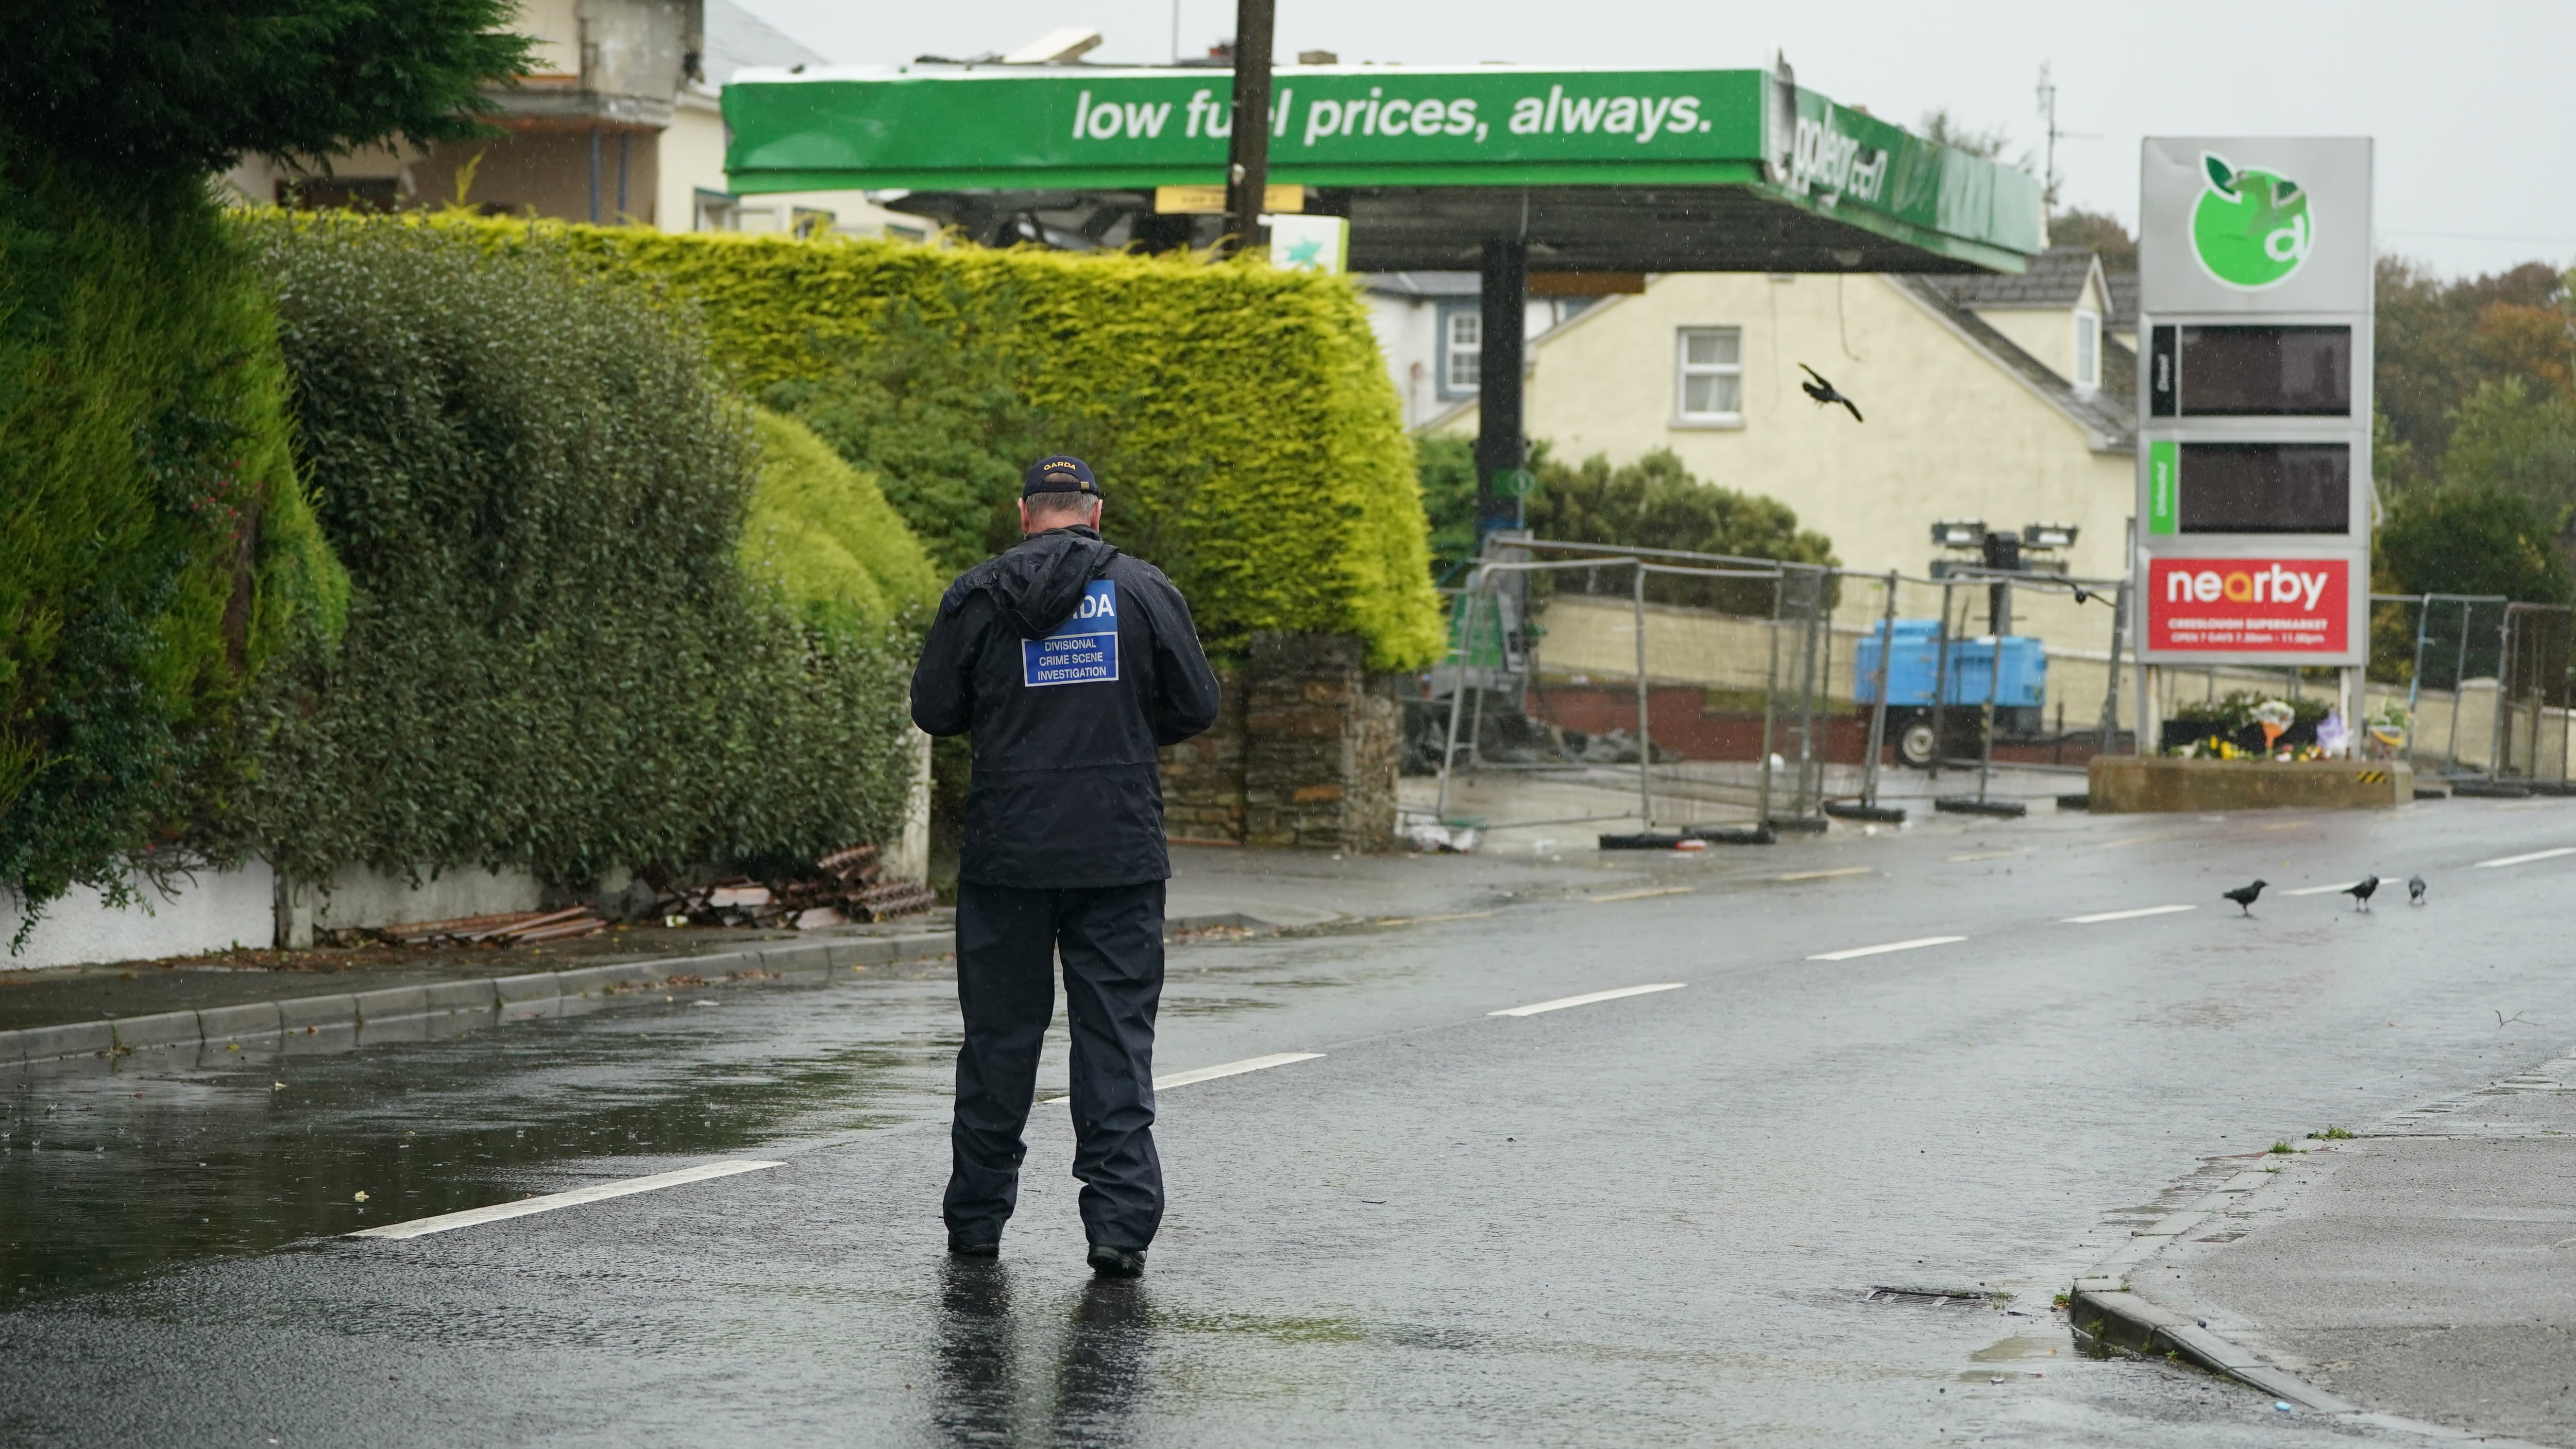 A Garda crime scene investigator at the scene of an explosion at Applegreen service station in the village of Creeslough in Co Donegal, where 10 people were killed